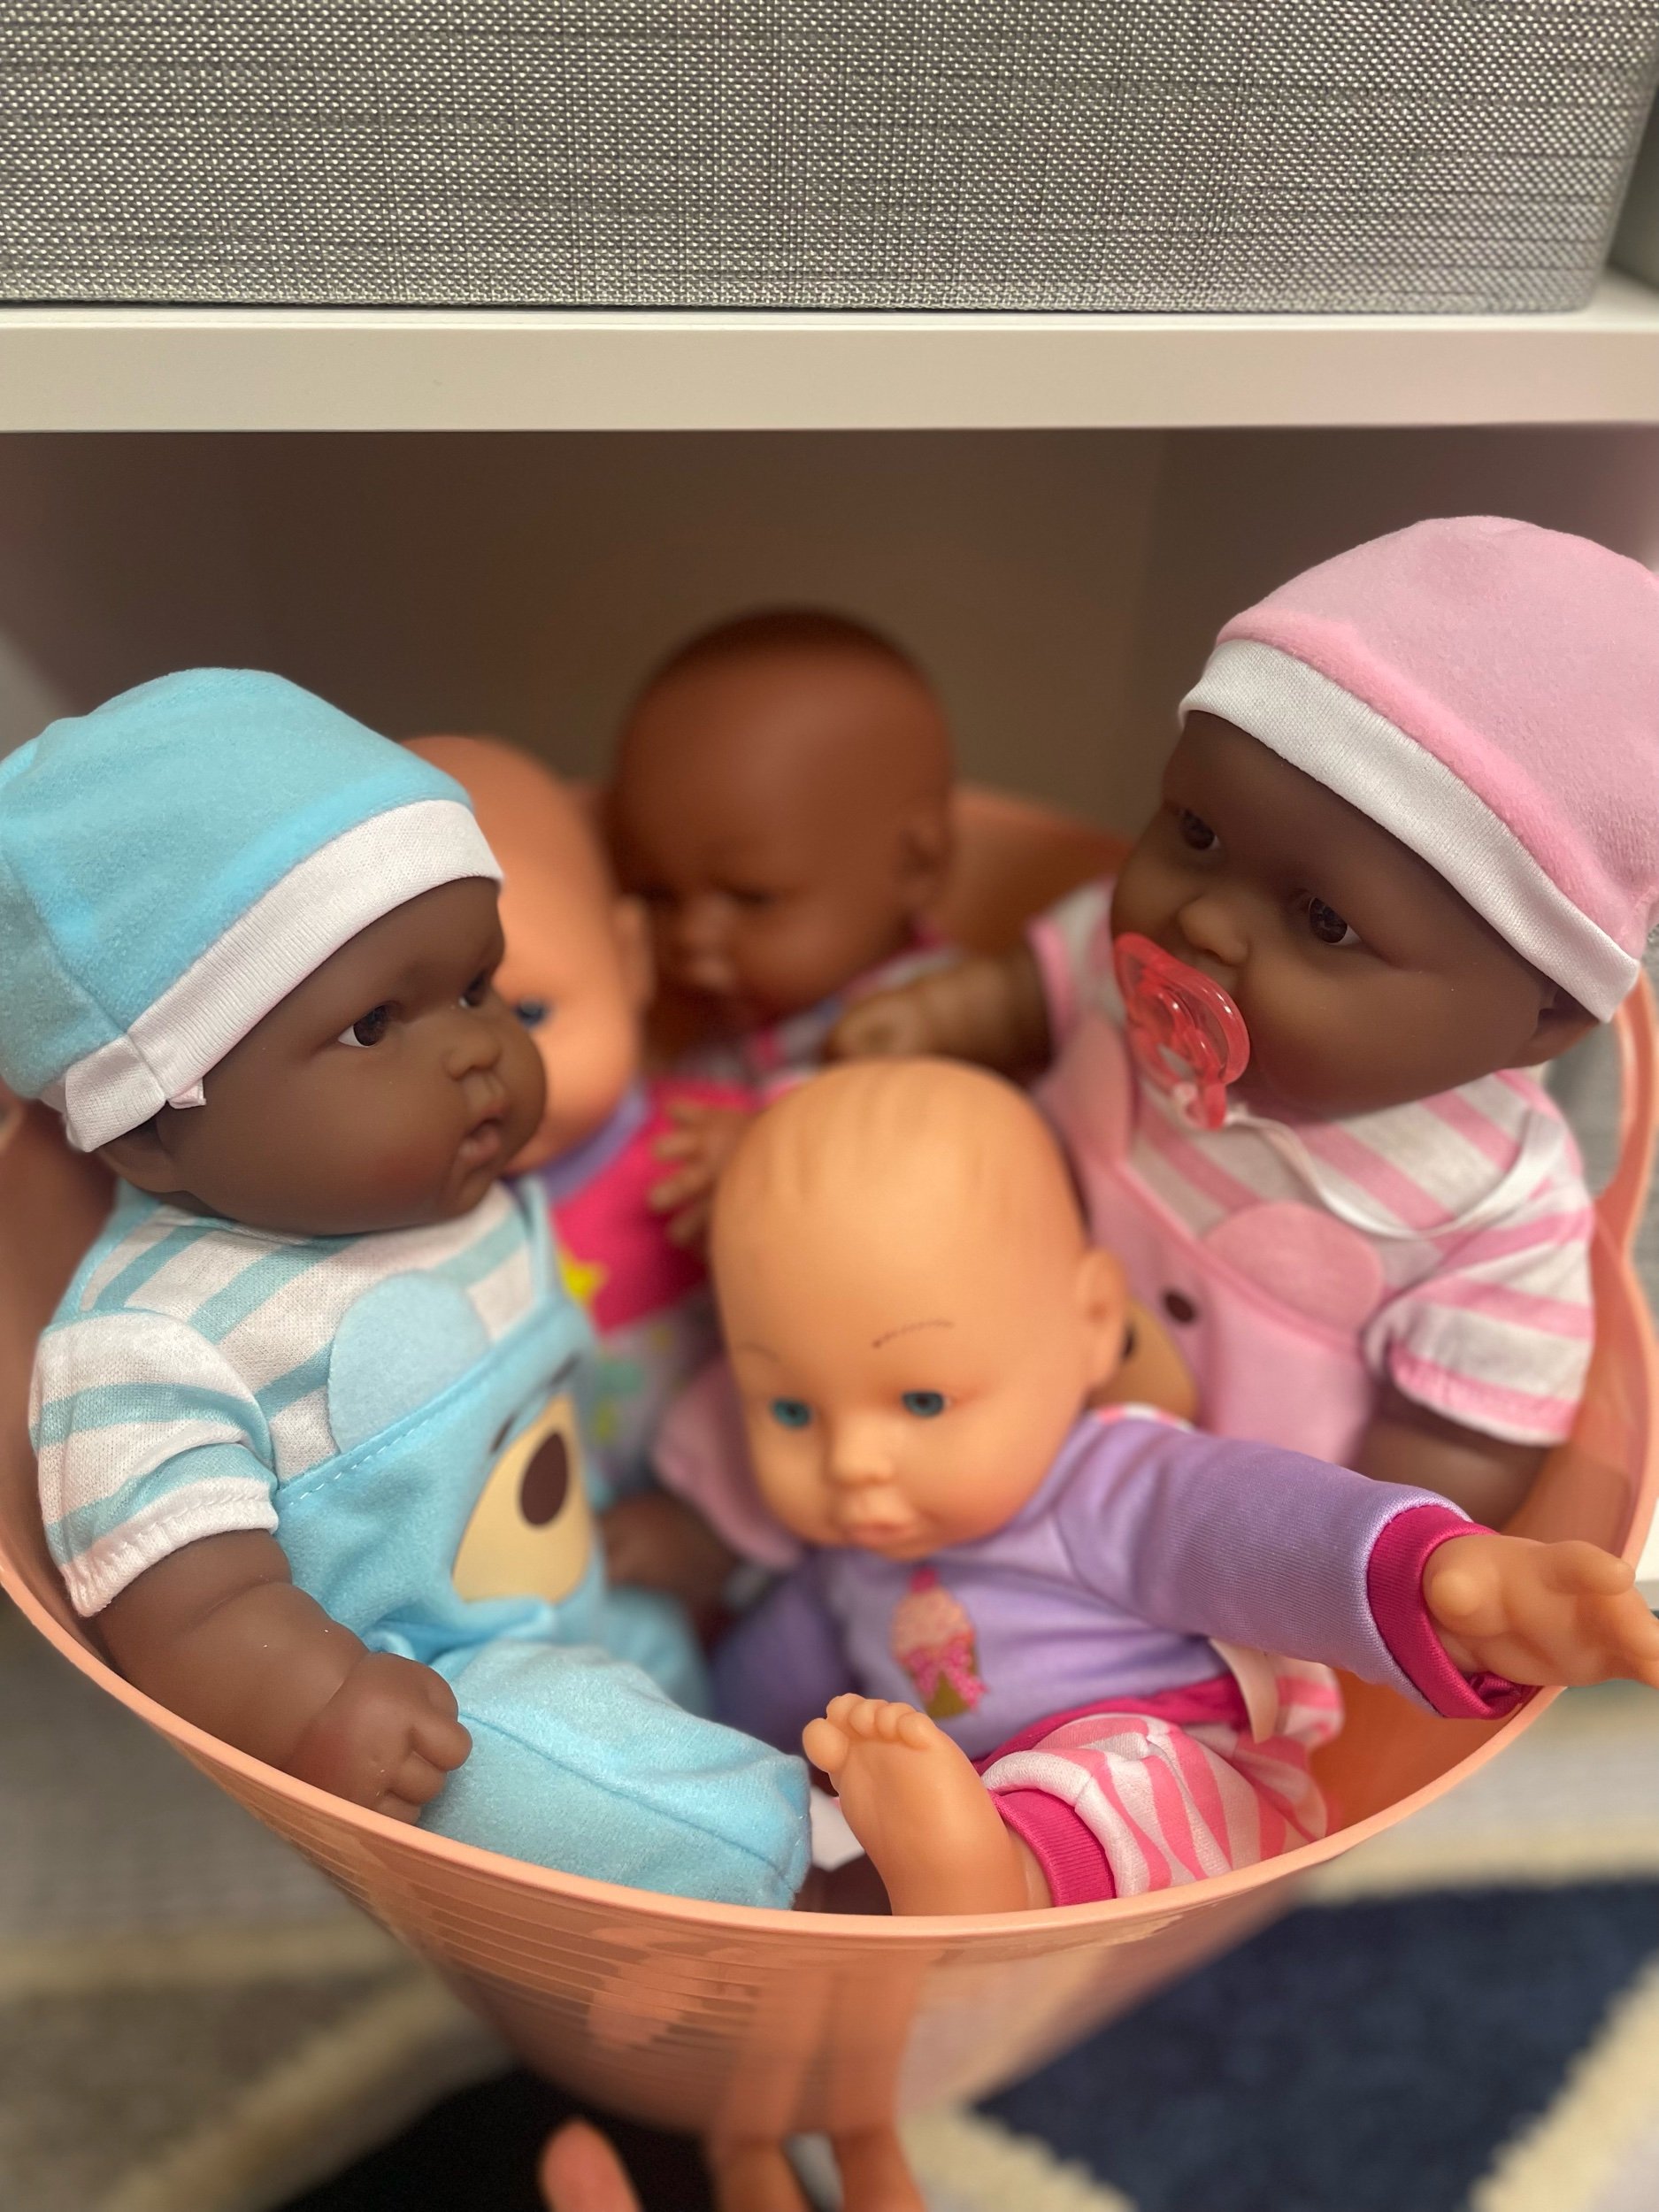  Data about the racial makeup of the children and families using the room guided our choices about baby dolls included in the room.  